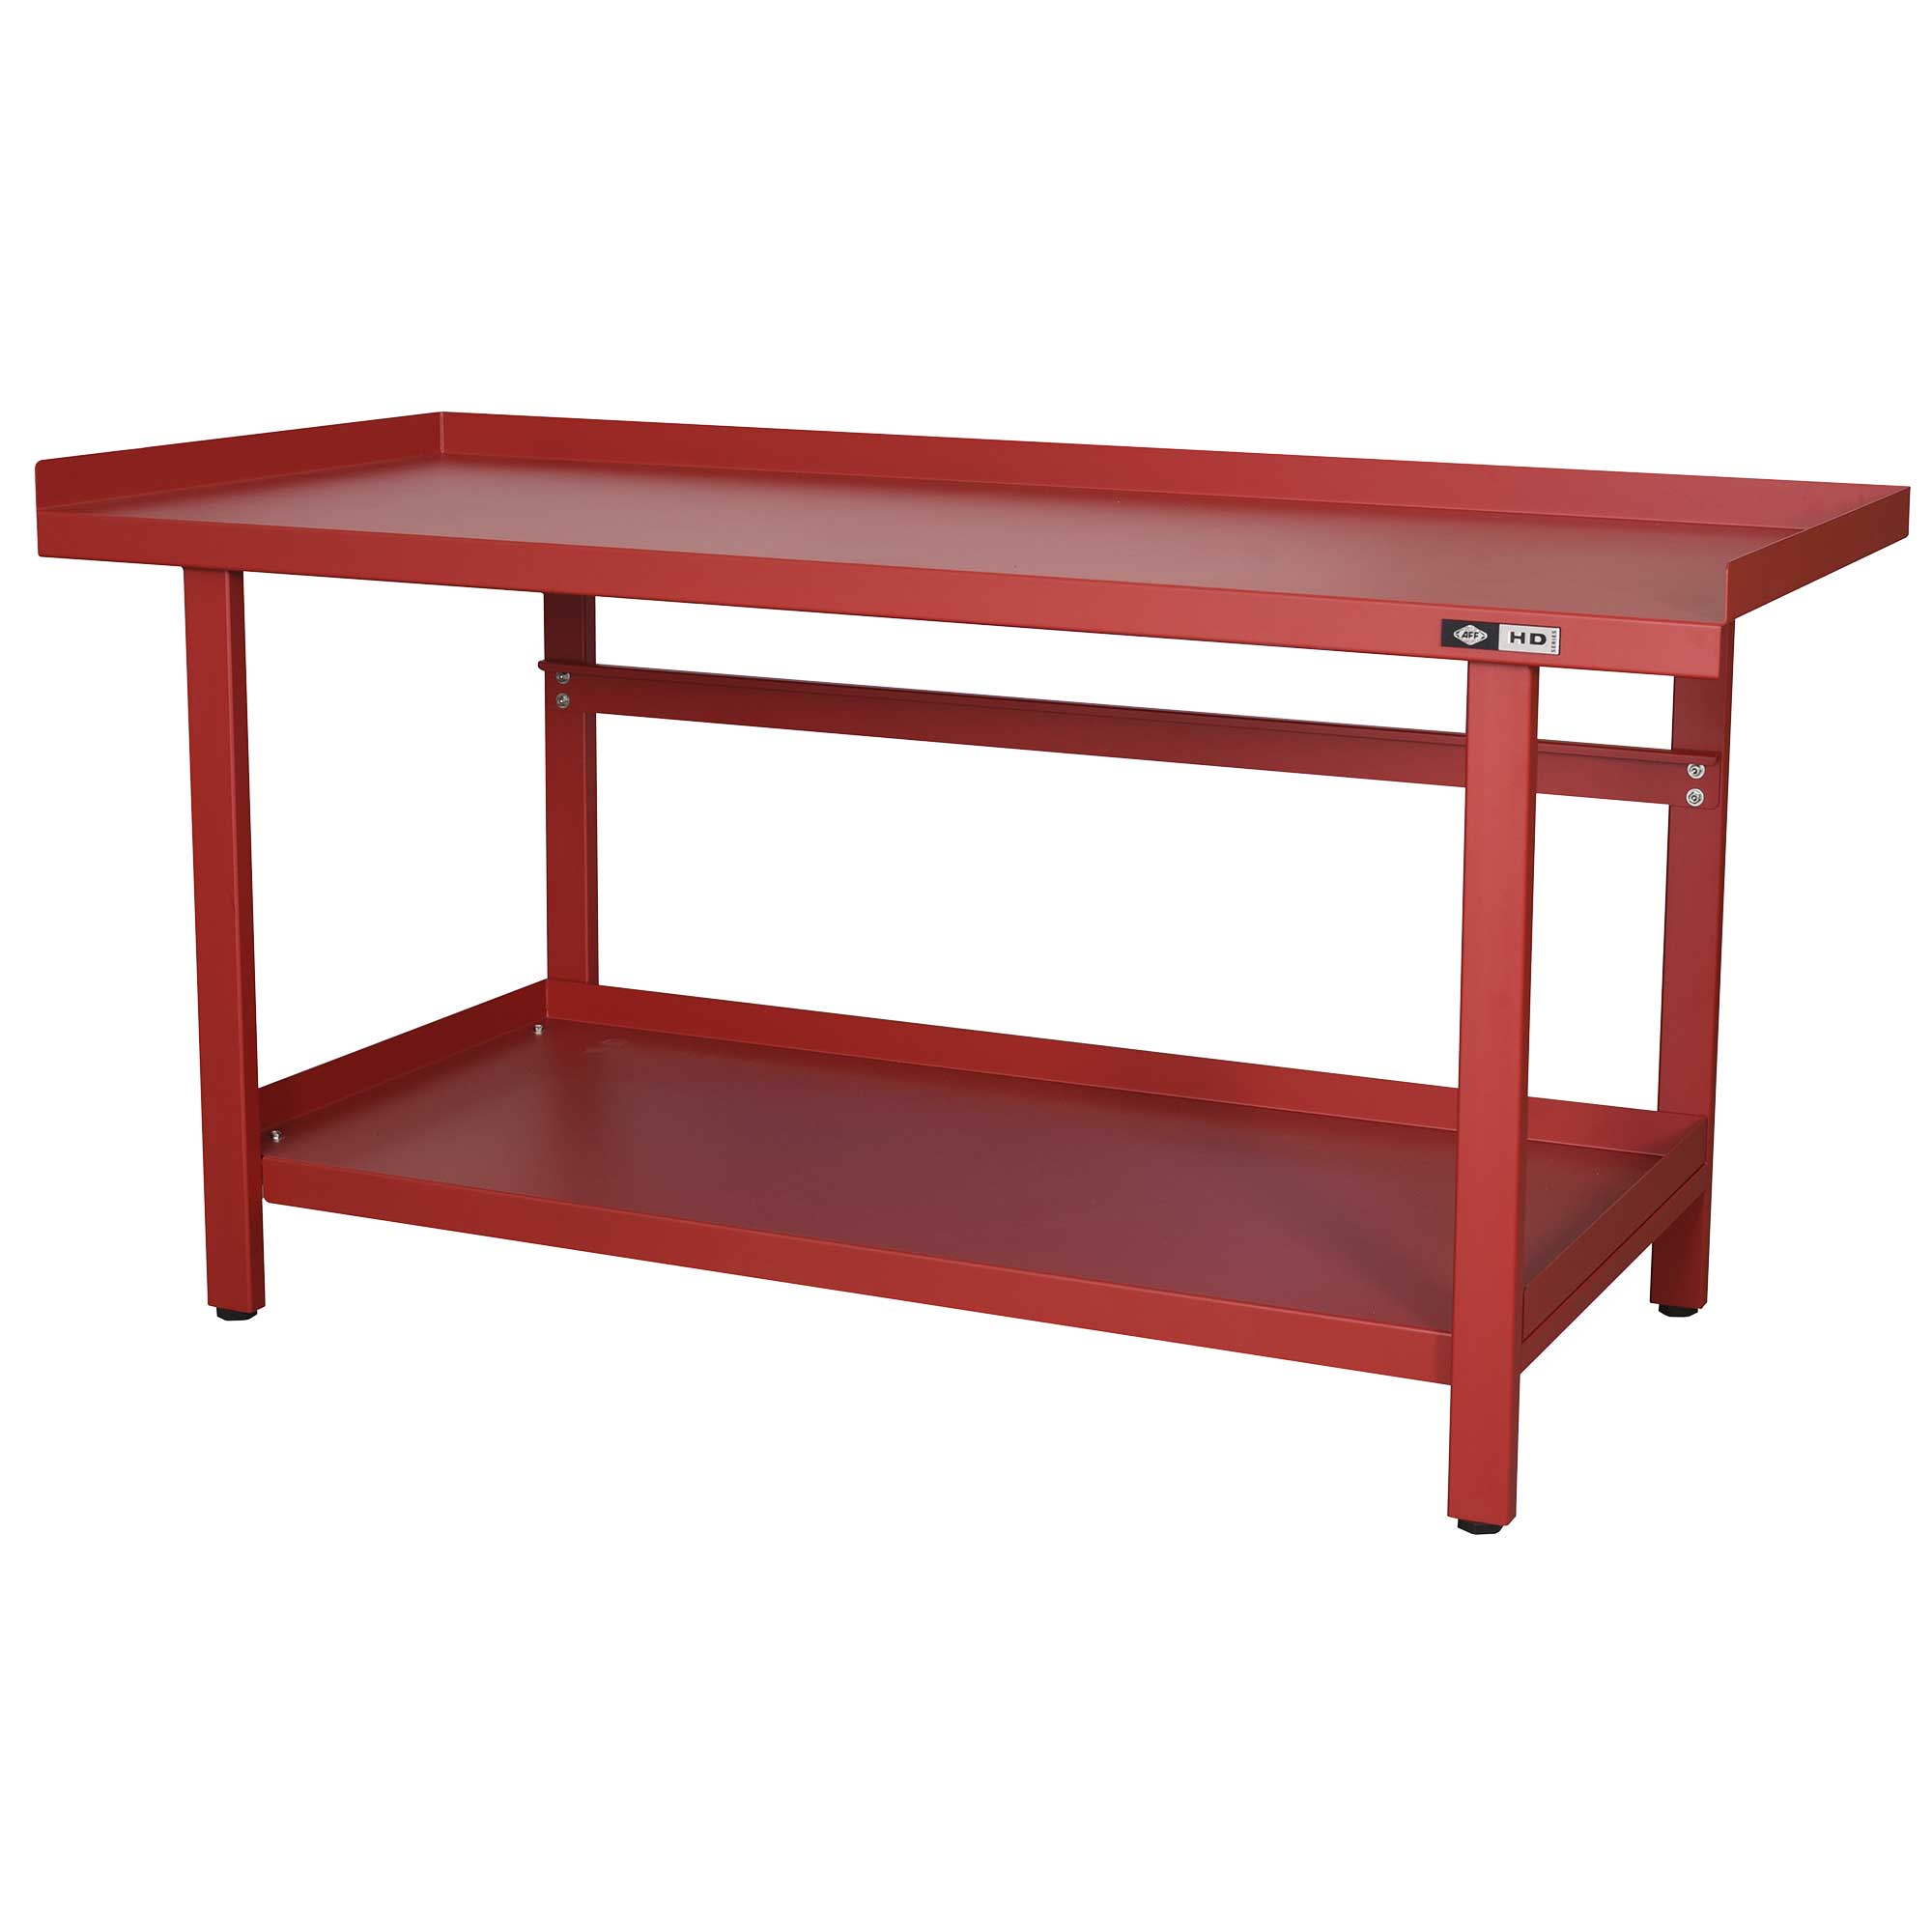 American Forge and Foundry - Heavy-Duty Workbench -  3996